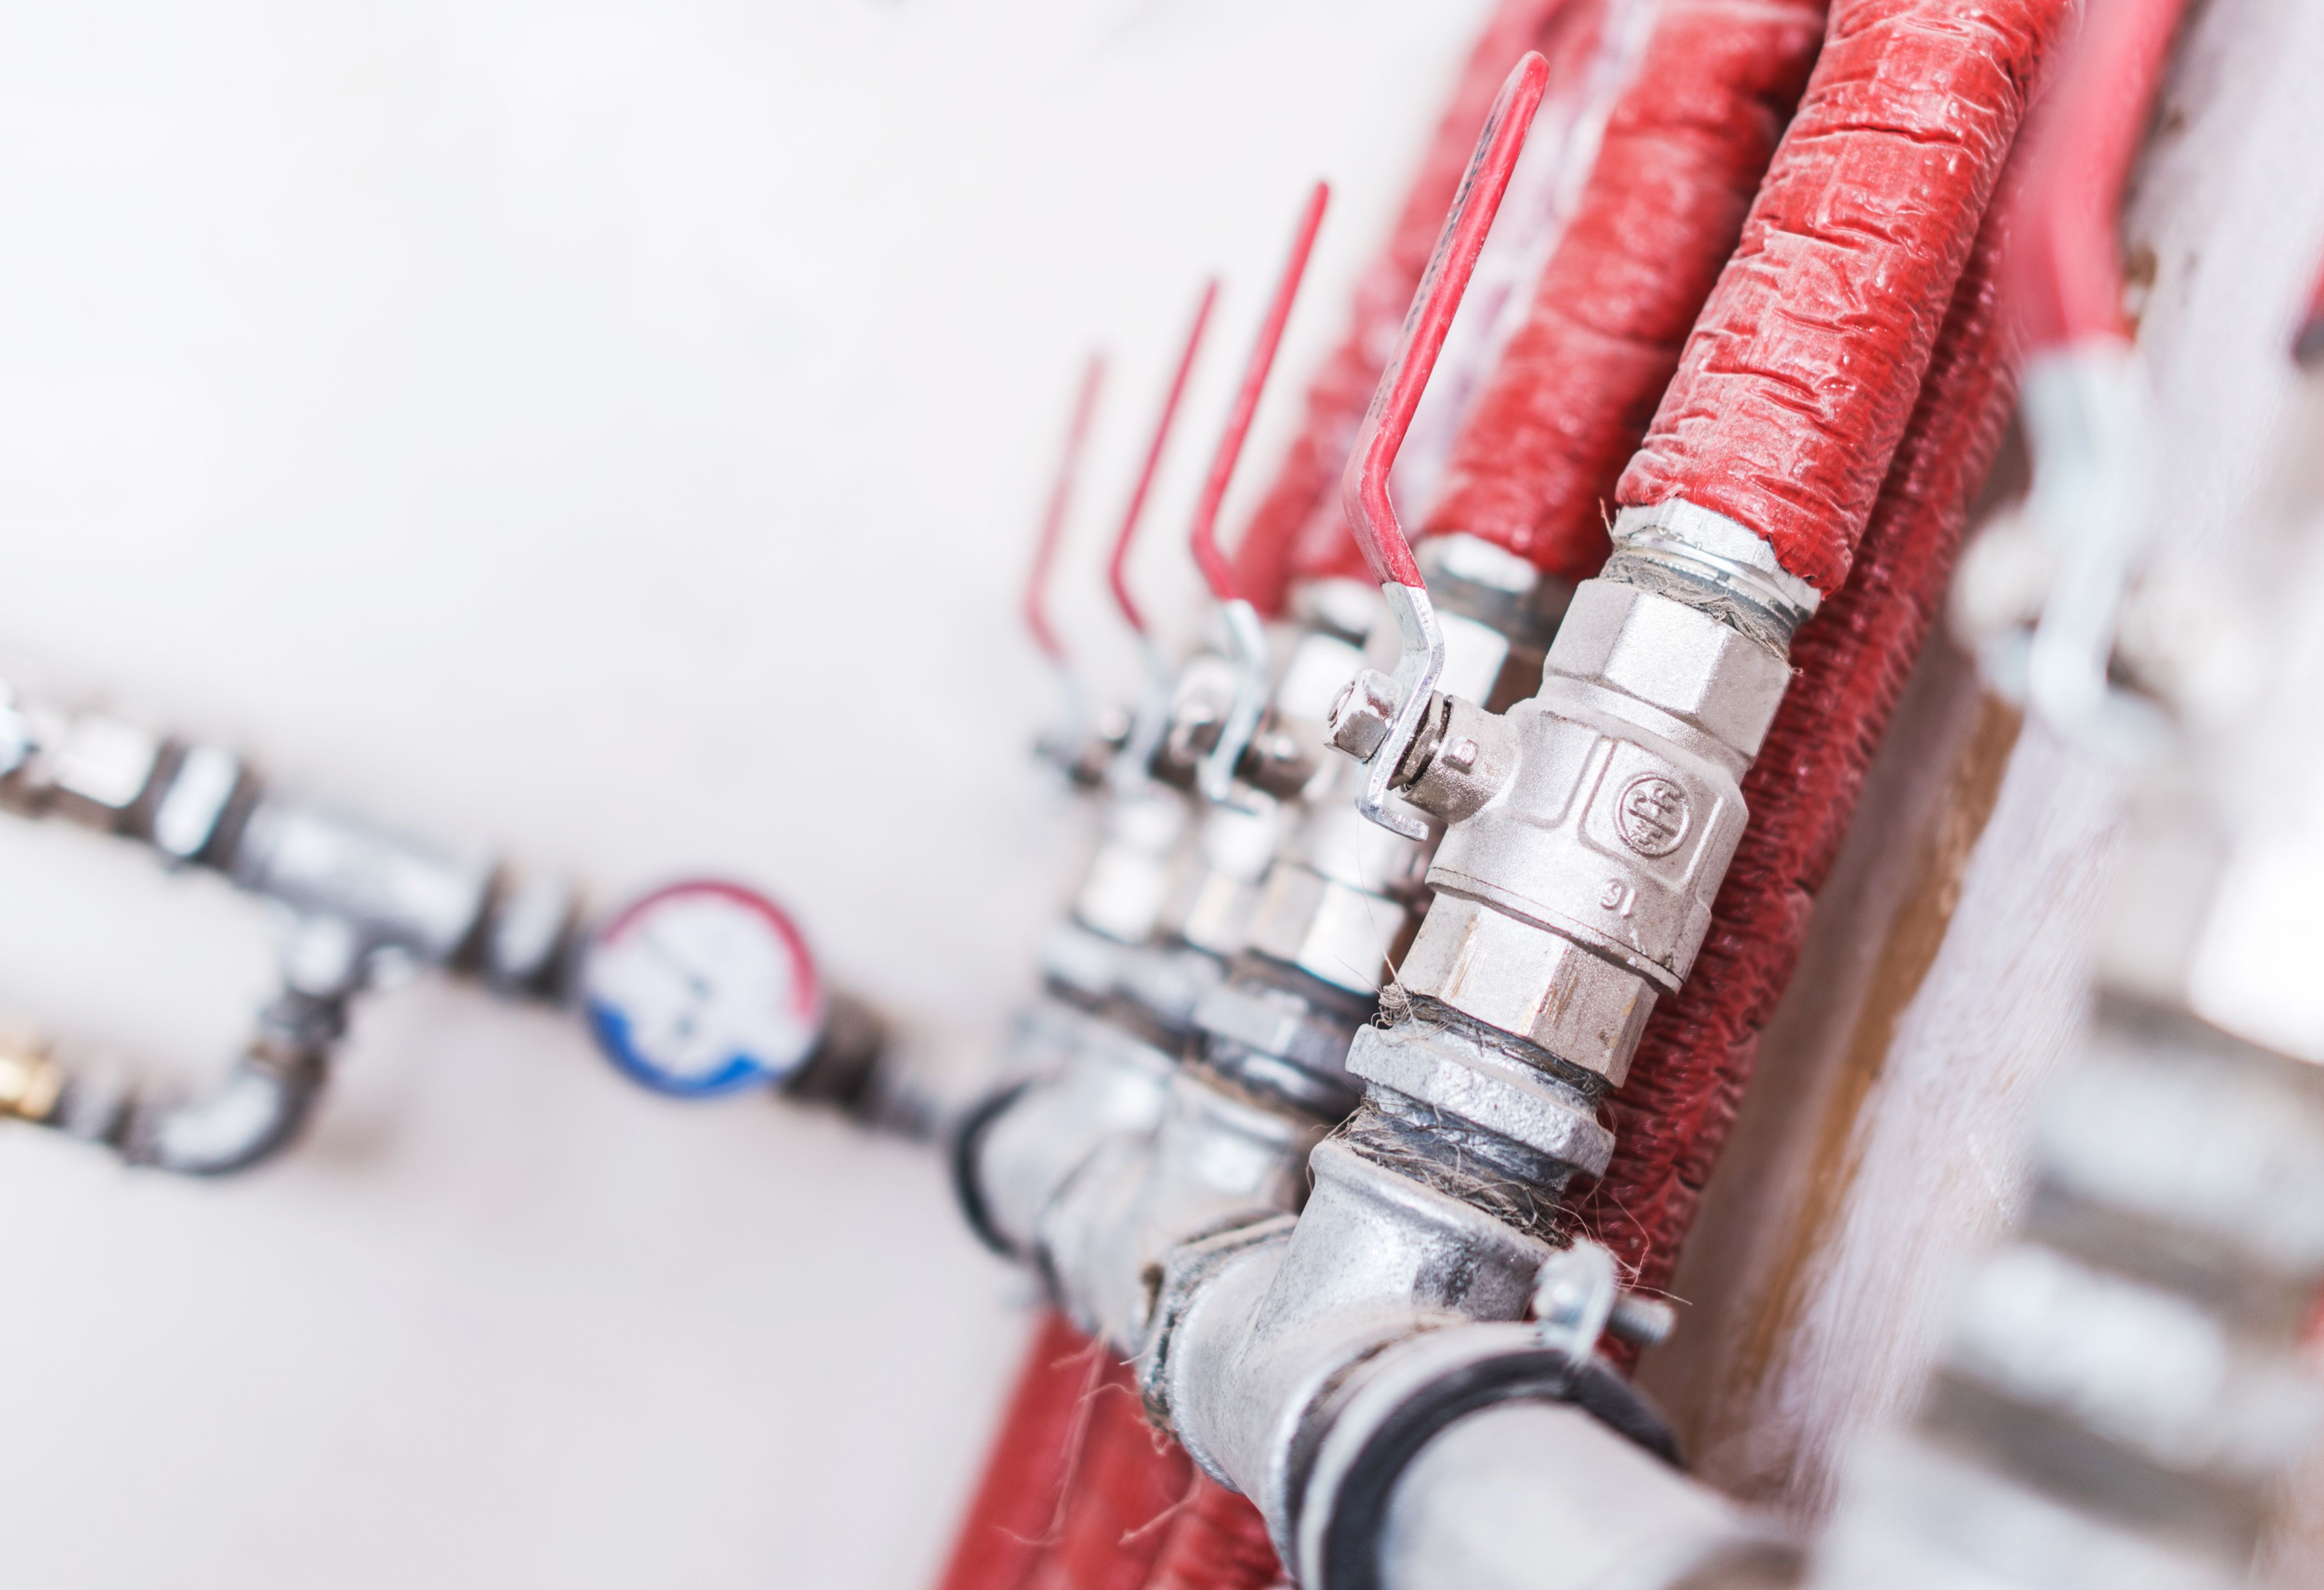 when remodeling a house what comes first - plumbing system